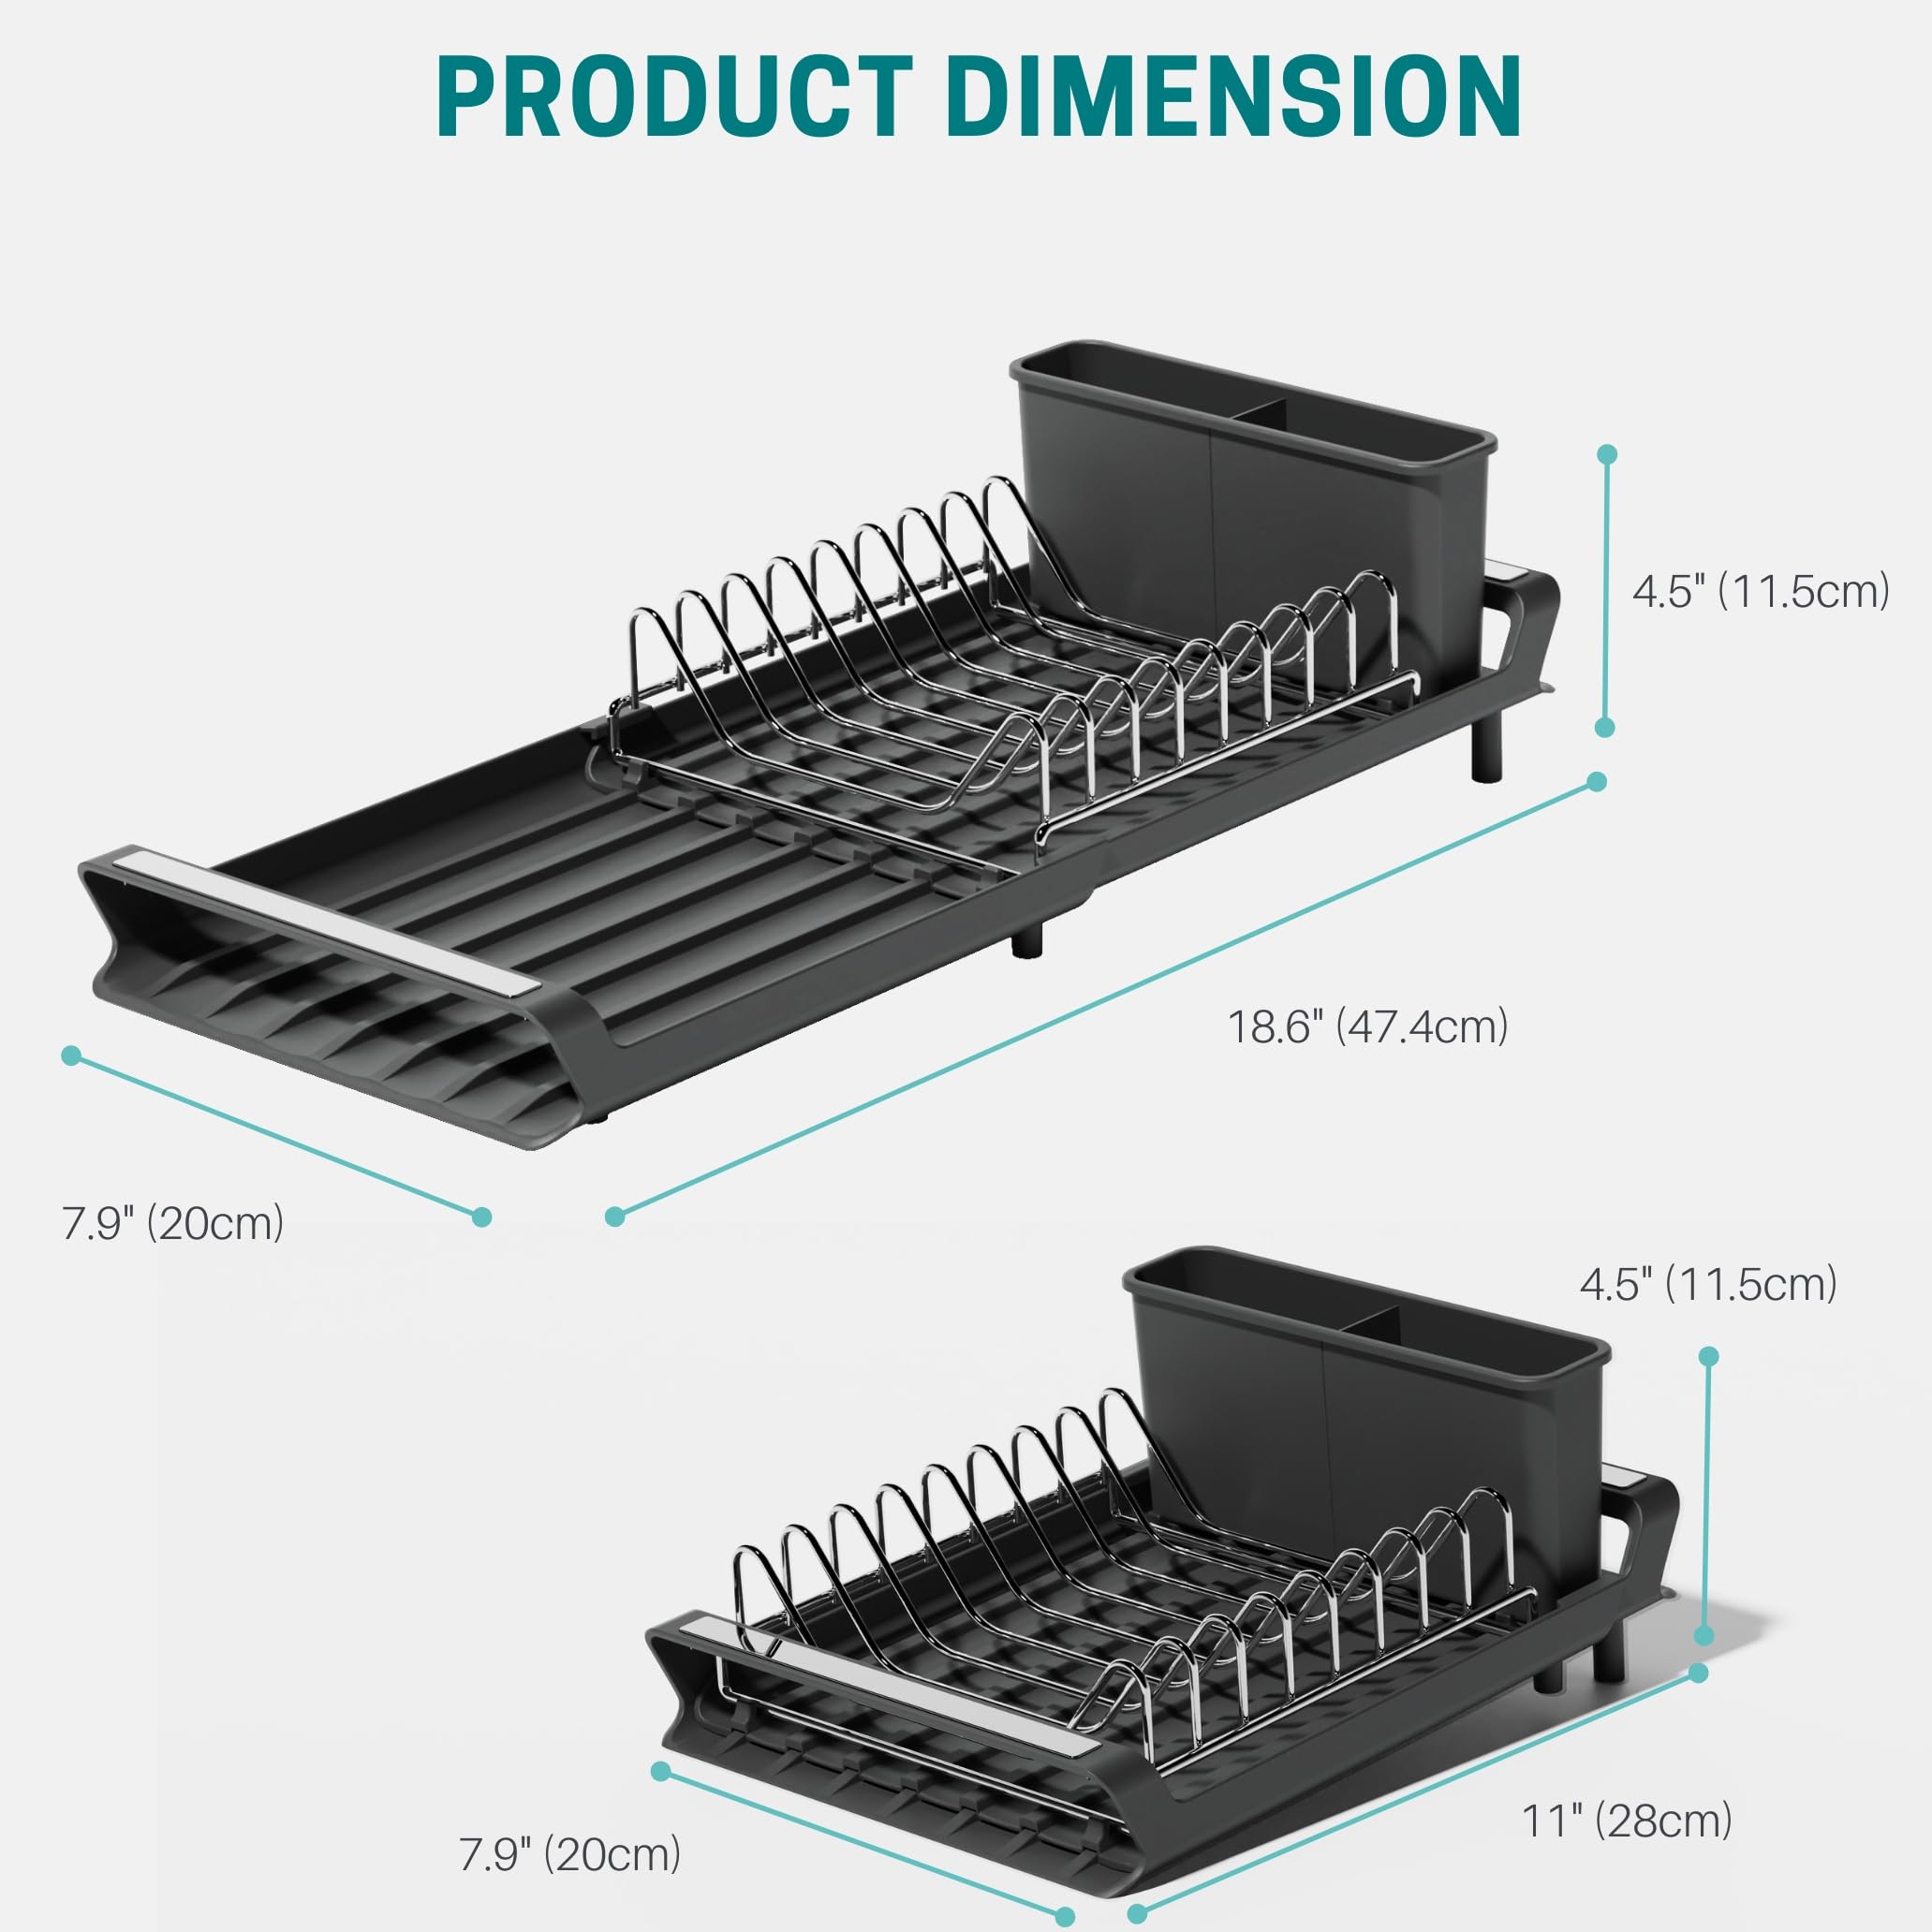 E-ROOM TREND Extendable Dish Drying Rack, Multifunctional Dish Rack for Kitchen Counter, Anti-Rust Drying Dish Rack with Cutlery Holders 18.6" L x 7.9" W, Black(DR402B)